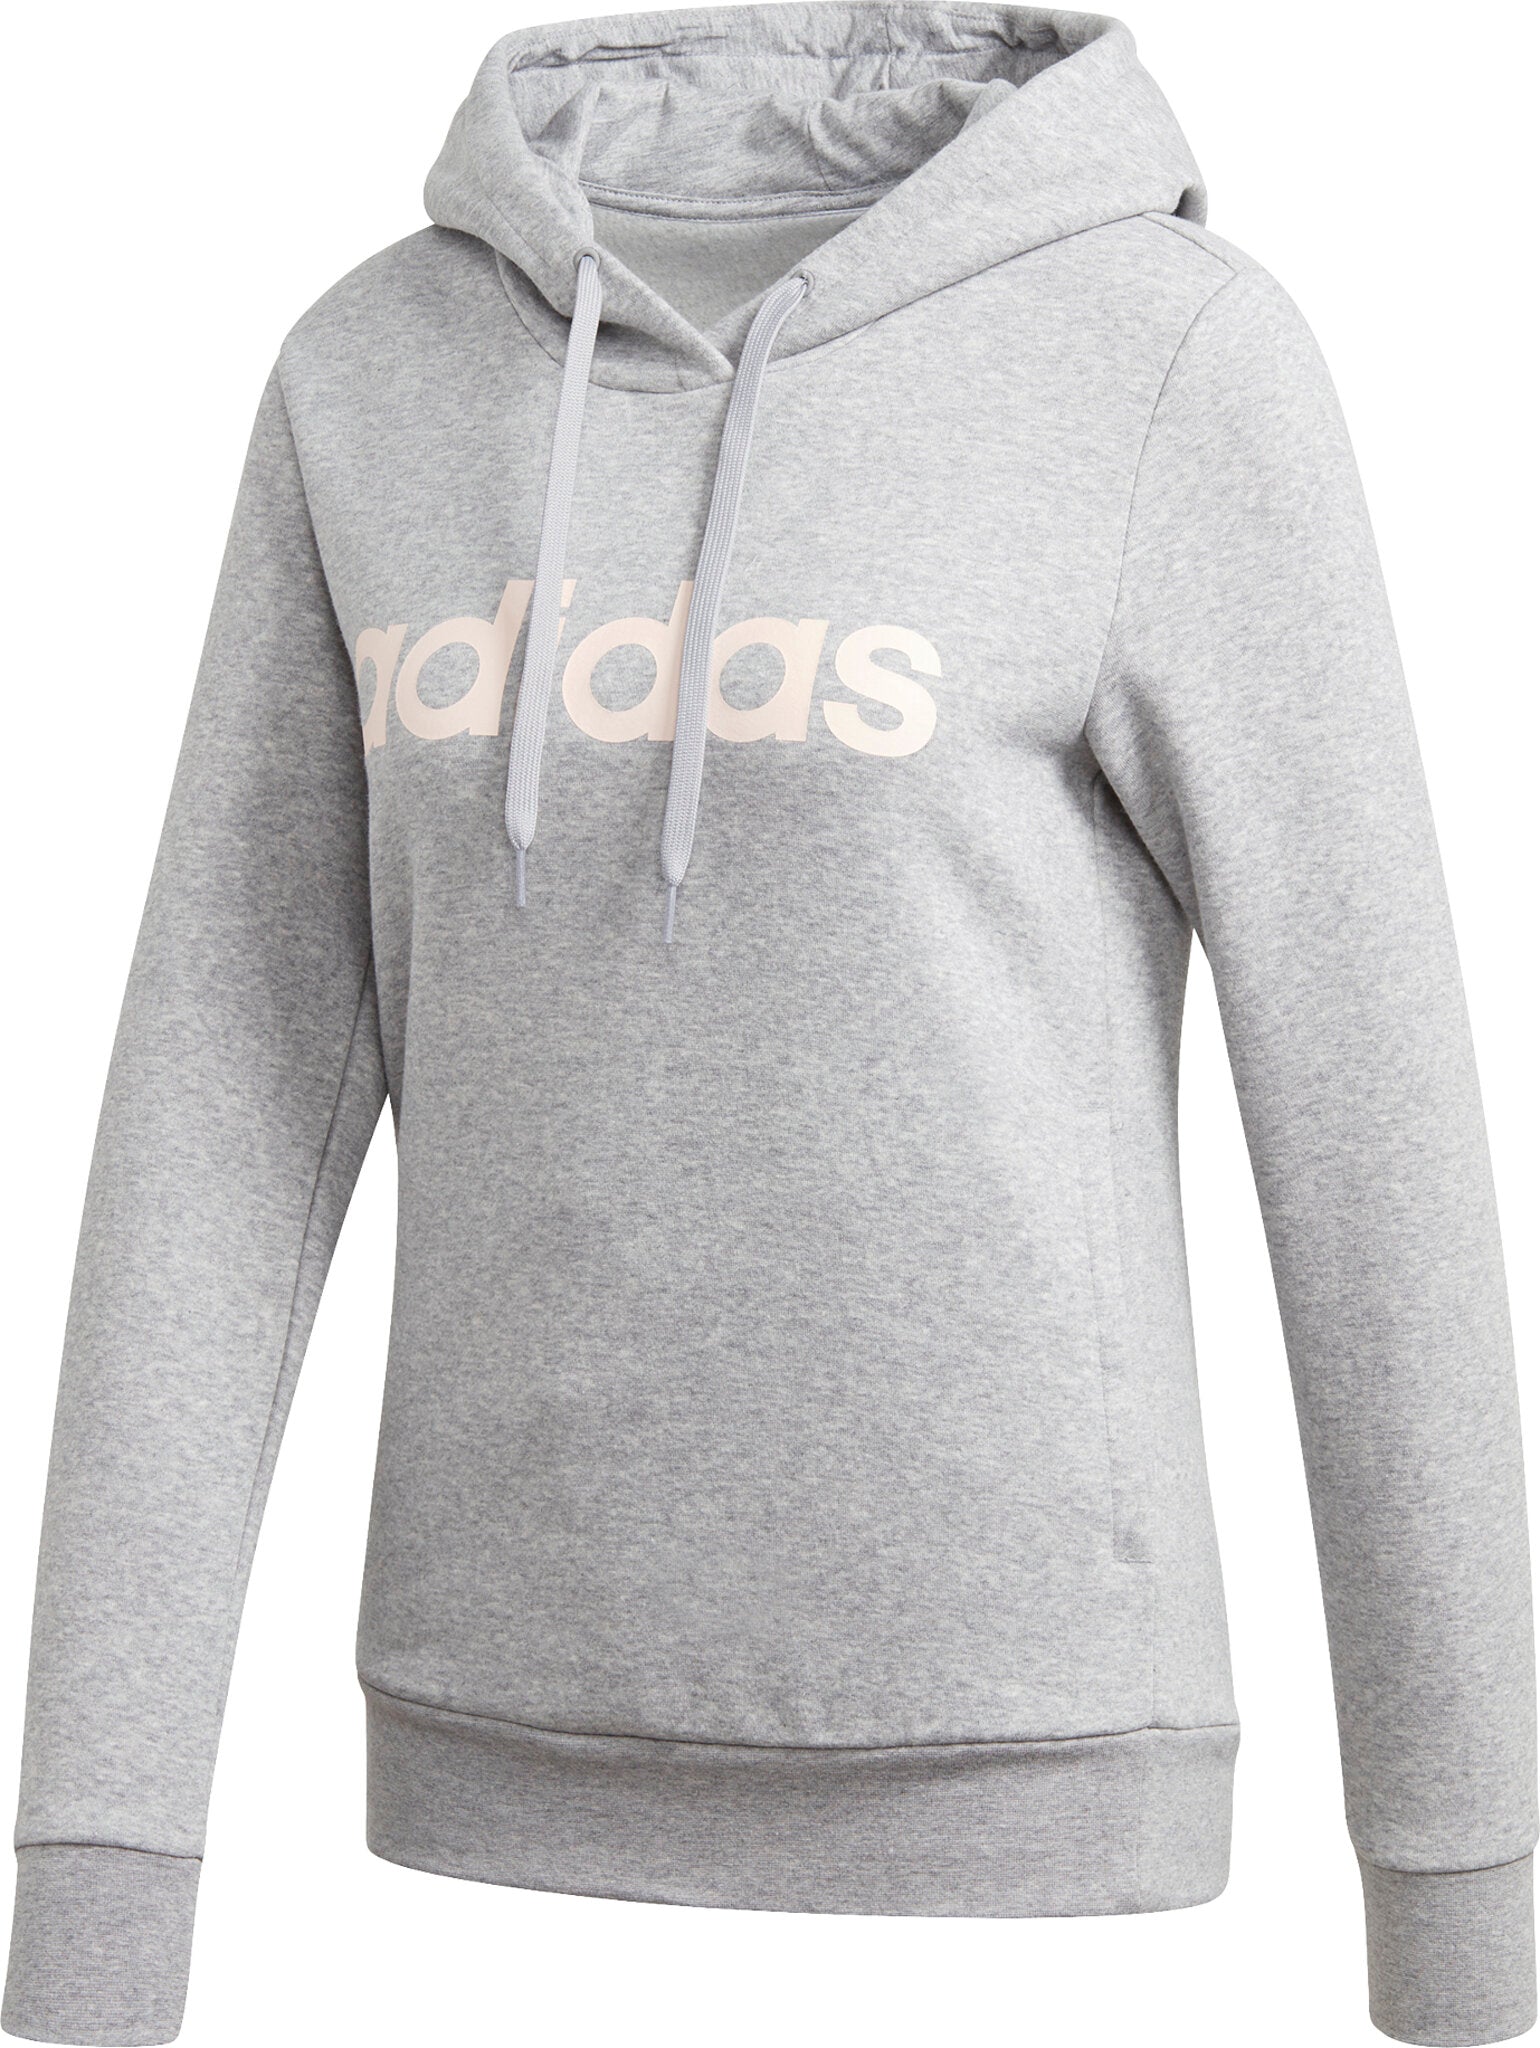 Adidas Essentials Linear Pullover Hoodie - Women's | Altitude Sports